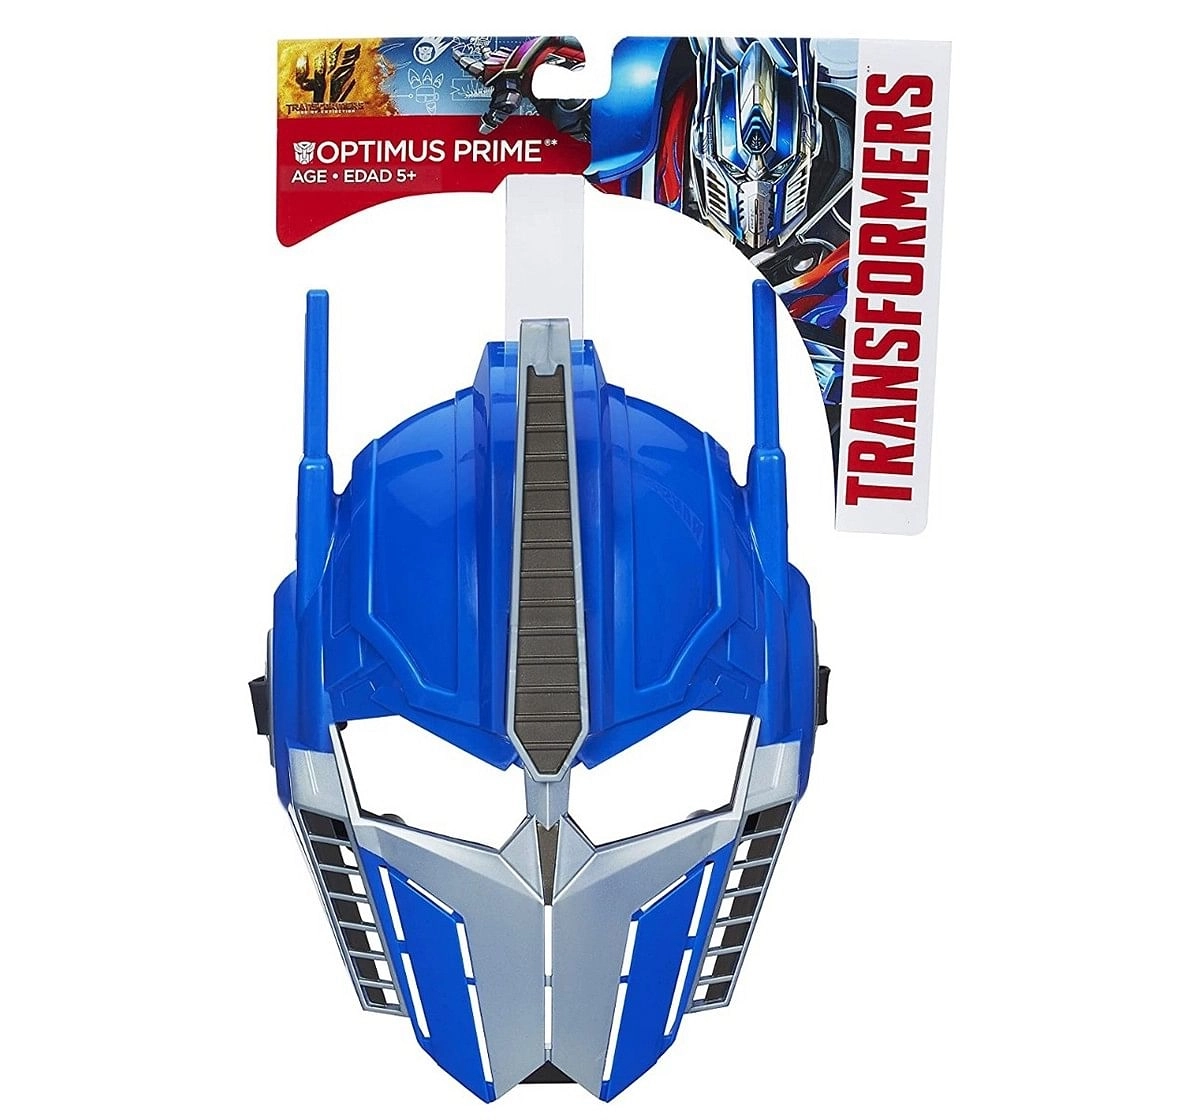 Transformers The Last Knight Optimus Prime Mask, Silver Action Figure Play Sets for Kids age 5Y+ (Silver)